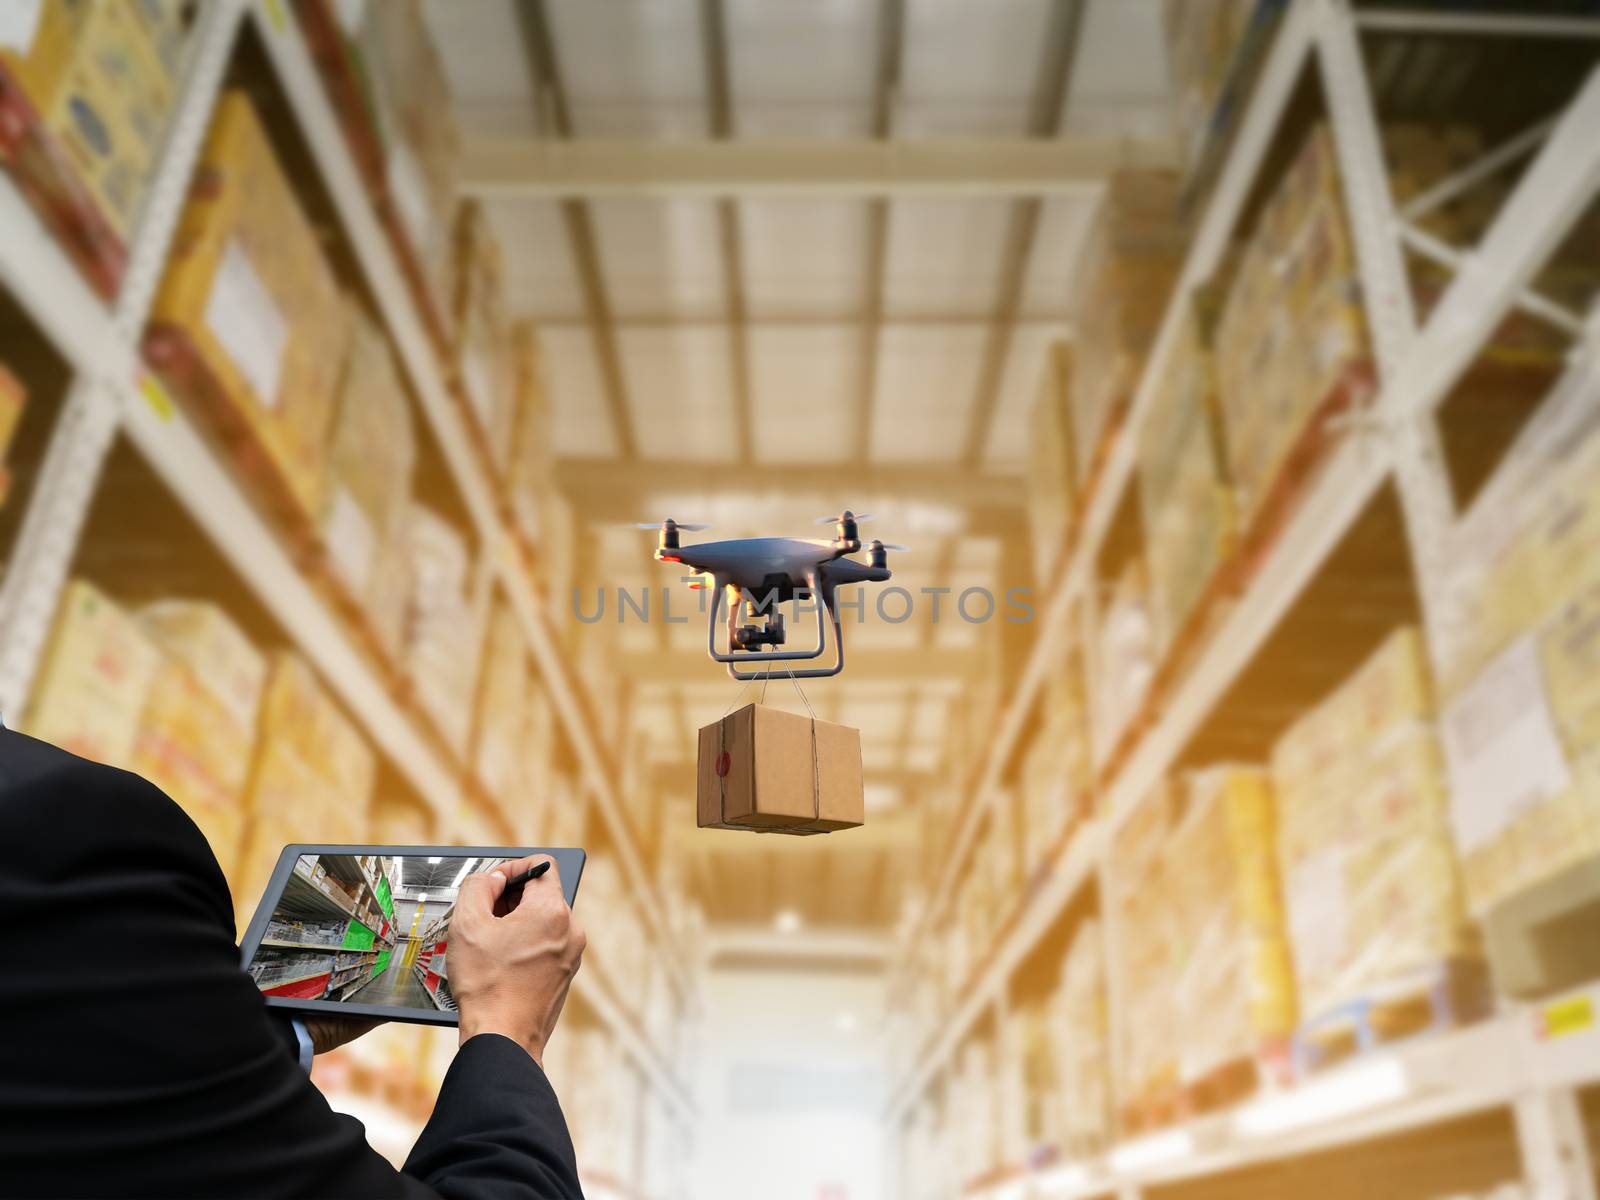 Person holding tablet control Industrial stock storage products storage system by drone unmanned aircraft by sompongtom